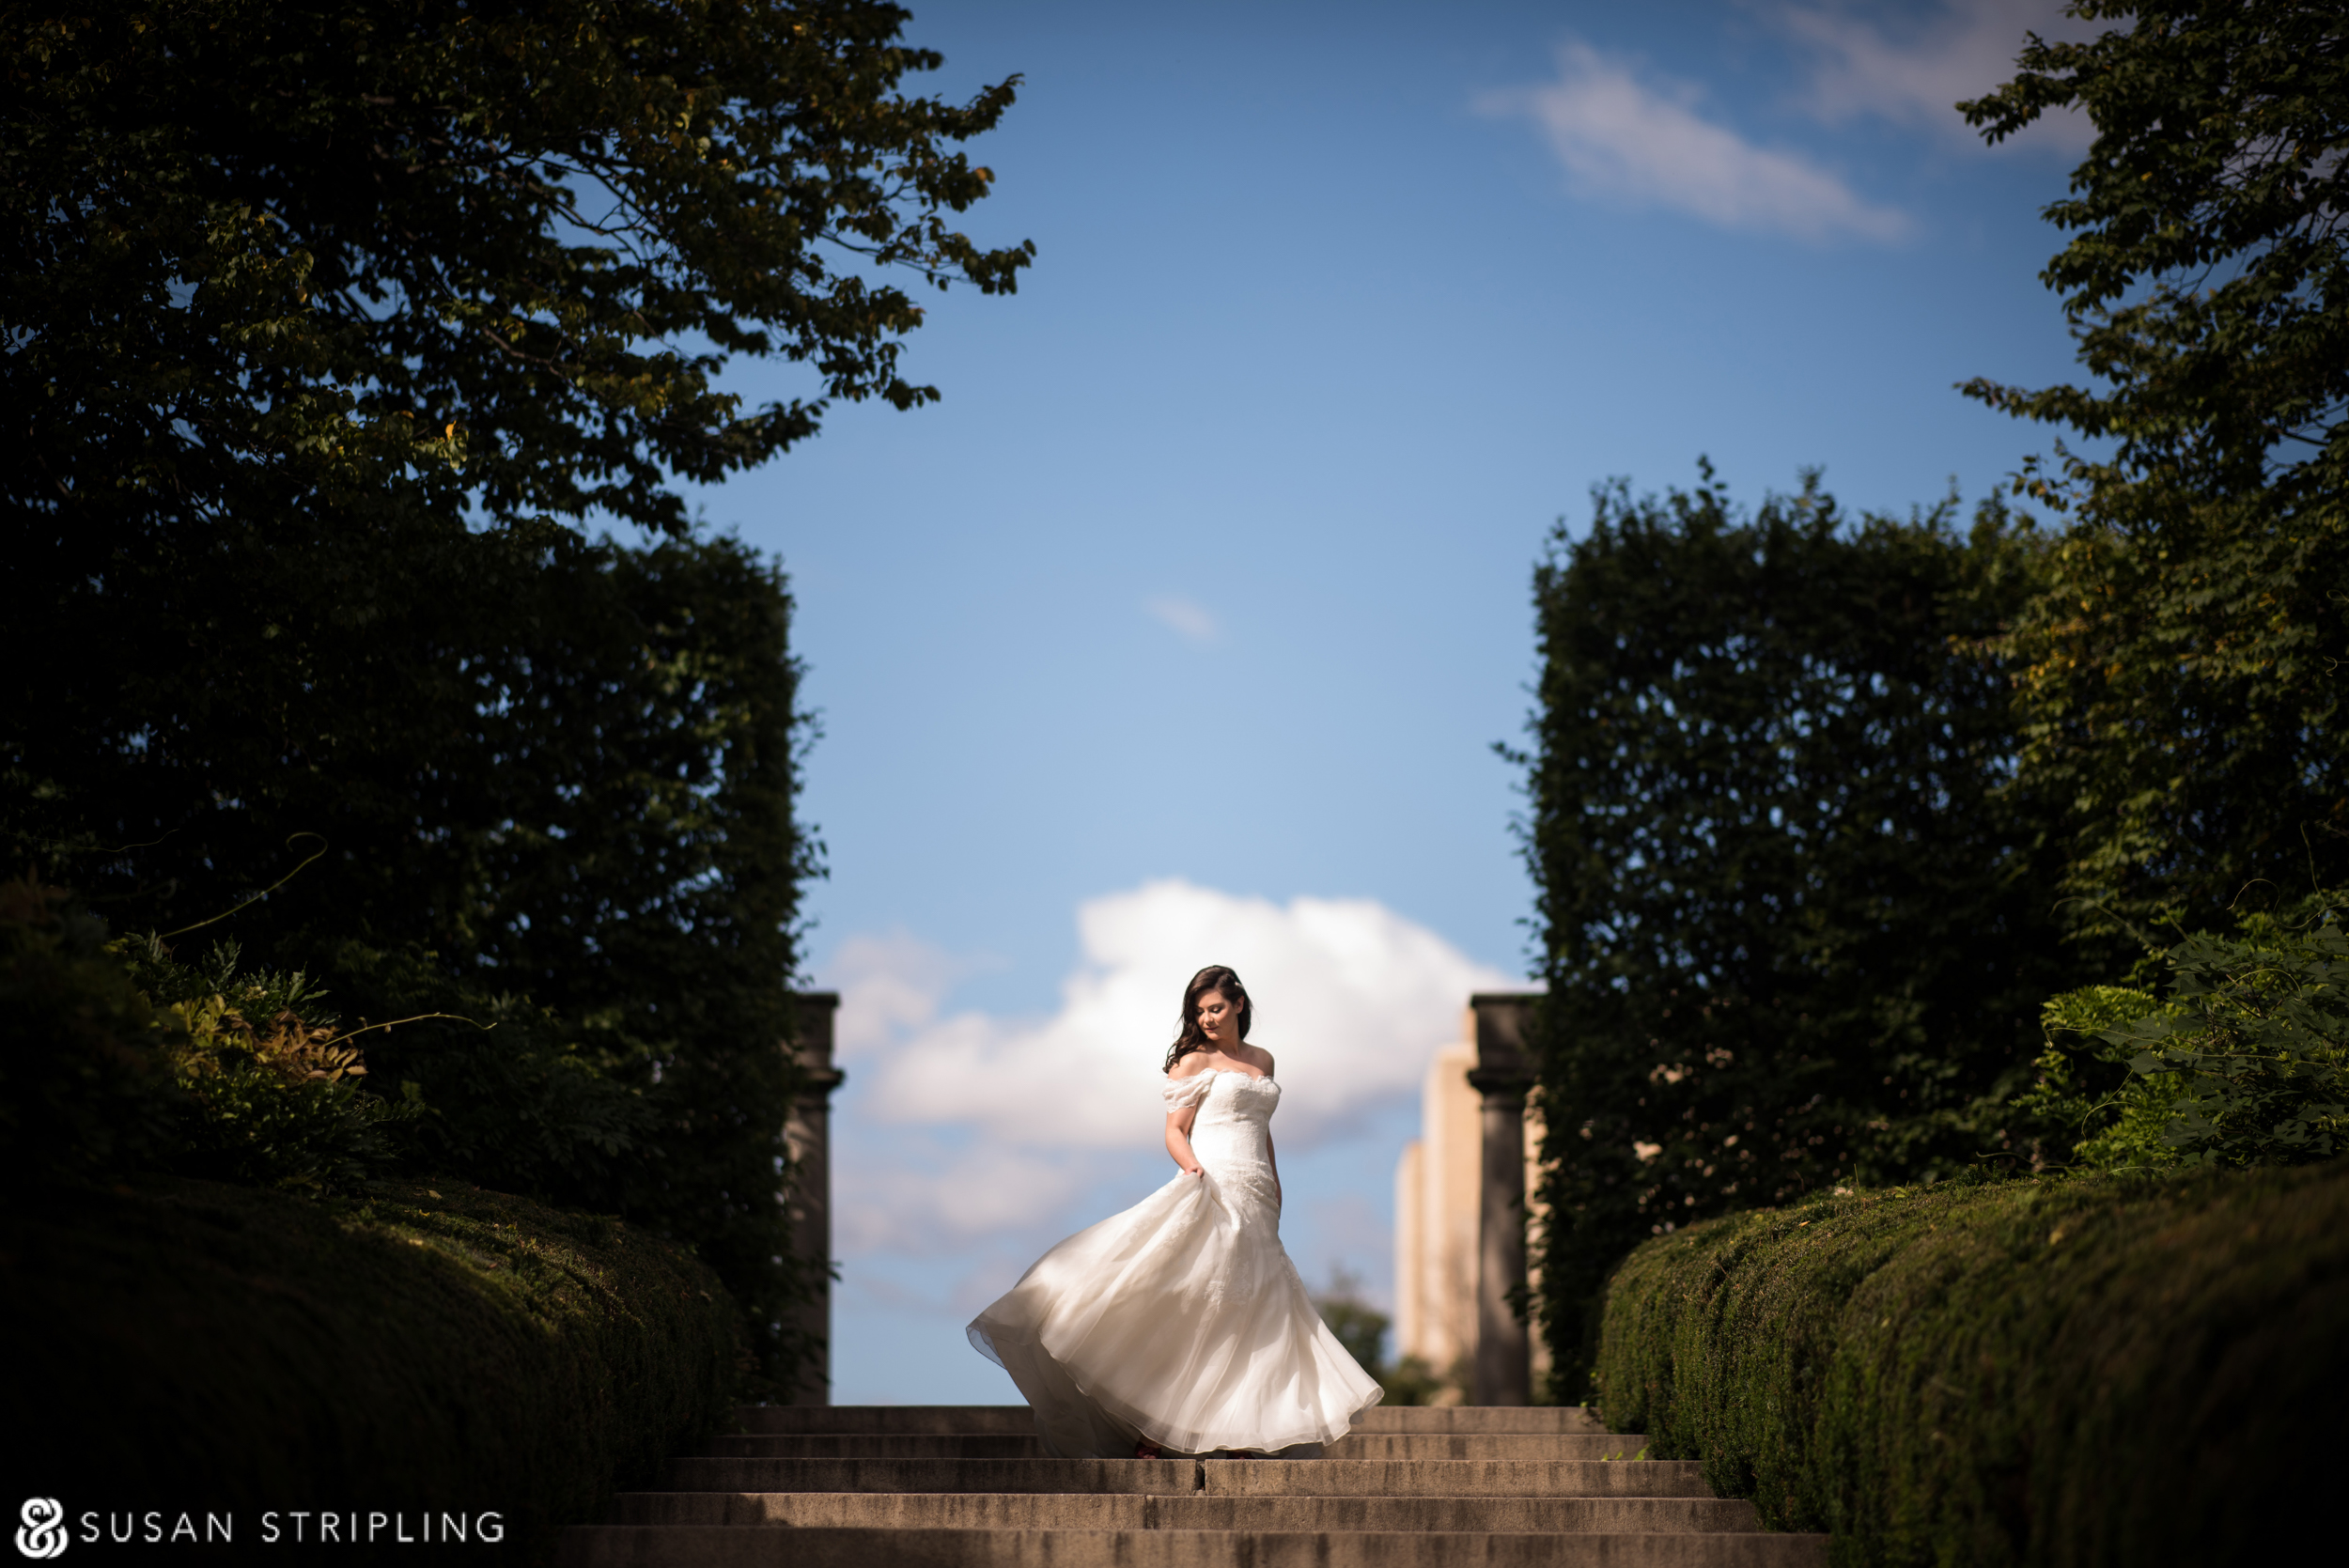 A fall bride in a white dress standing on steps in the Brooklyn Botanic Garden.